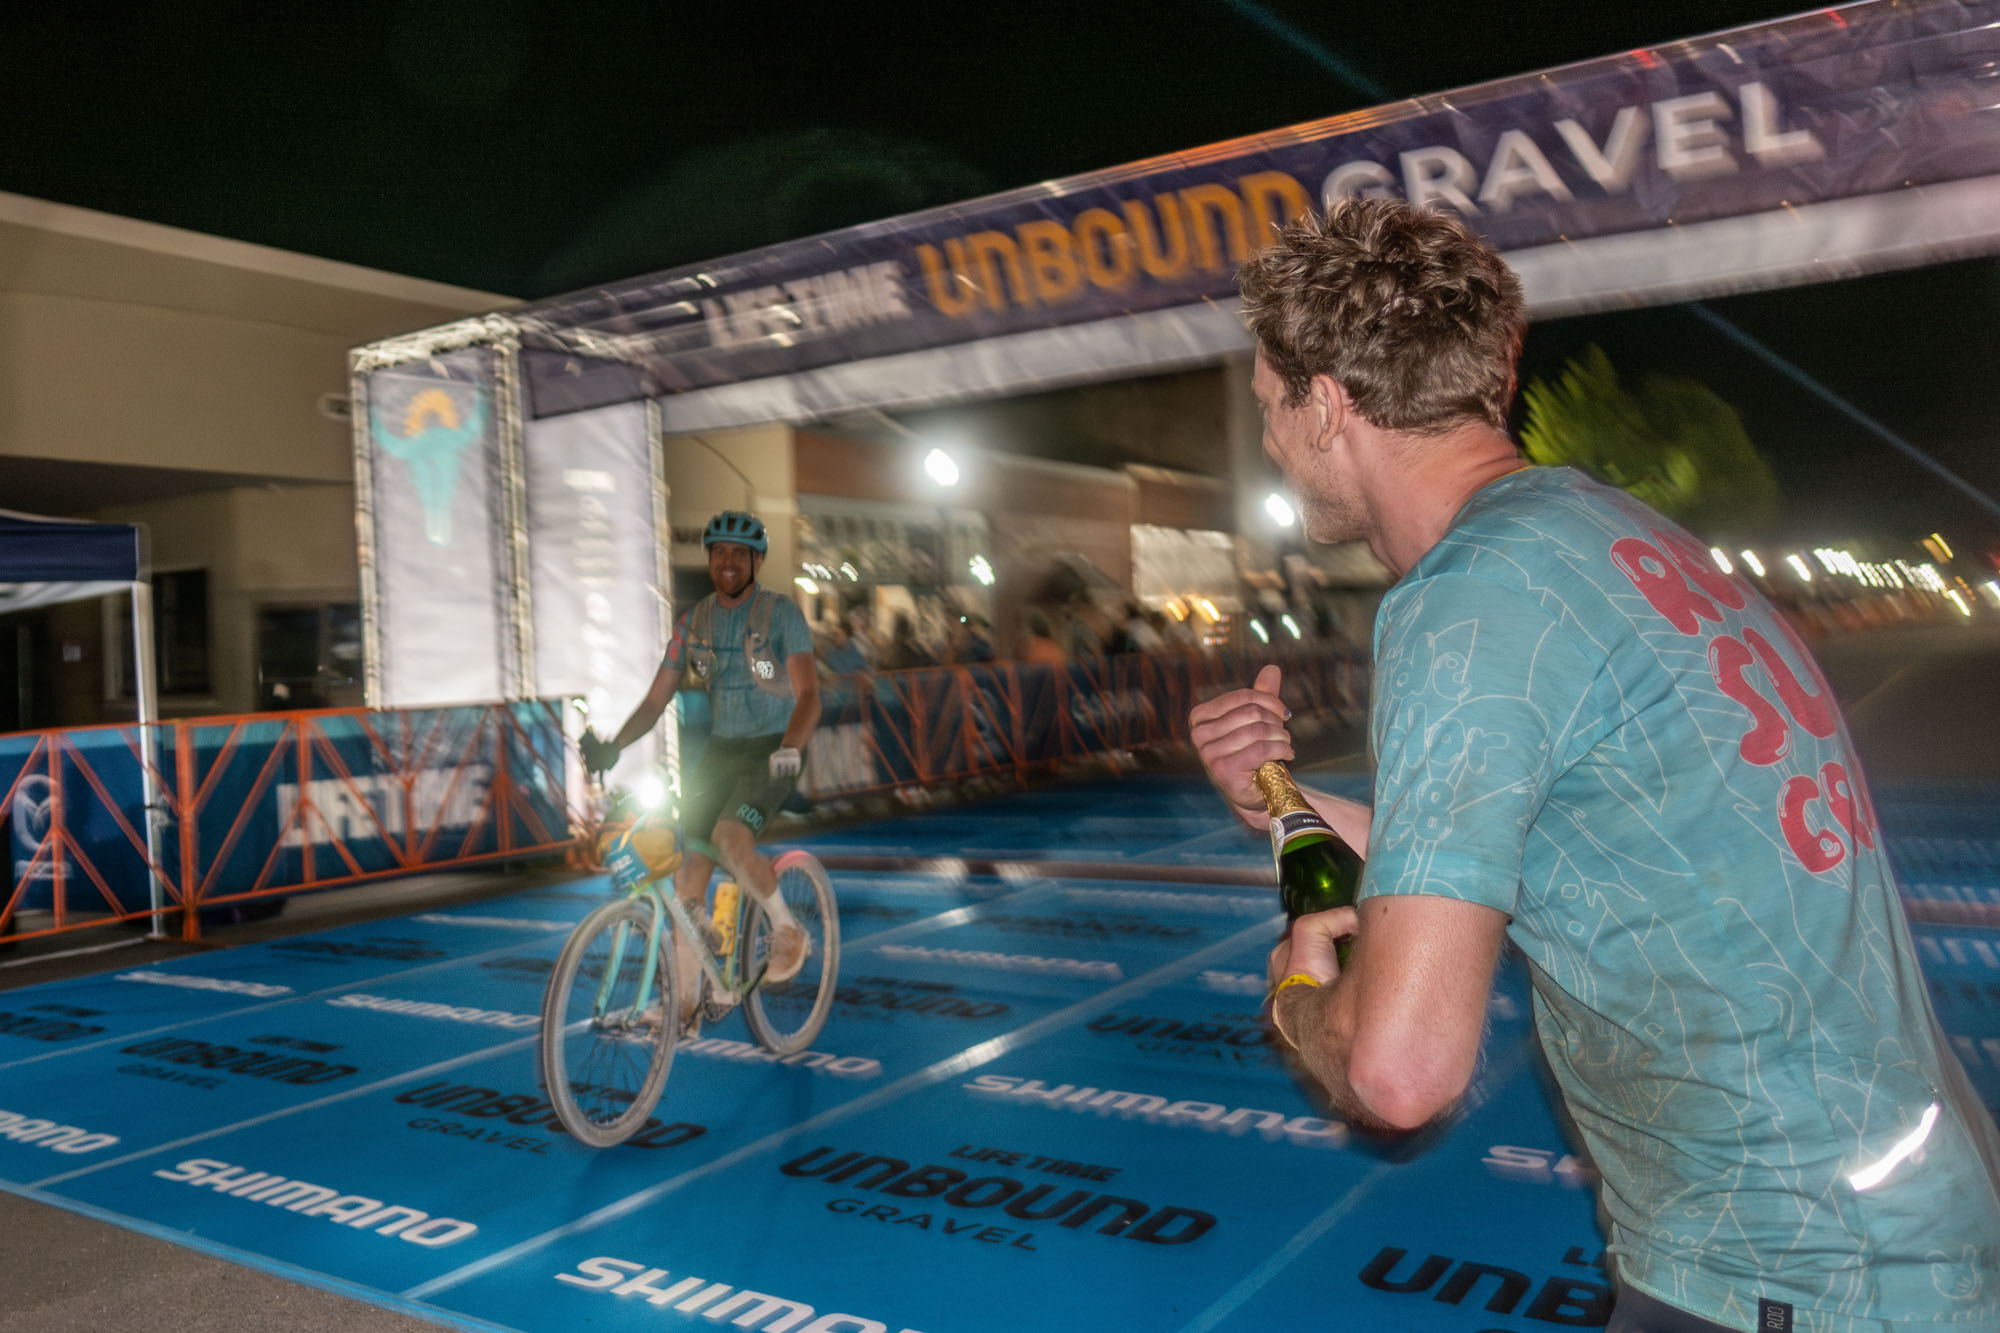 The last of the beach cruiser trio crosses the line after dark, smiling, while one of his teammates pops a bottle of champagne.